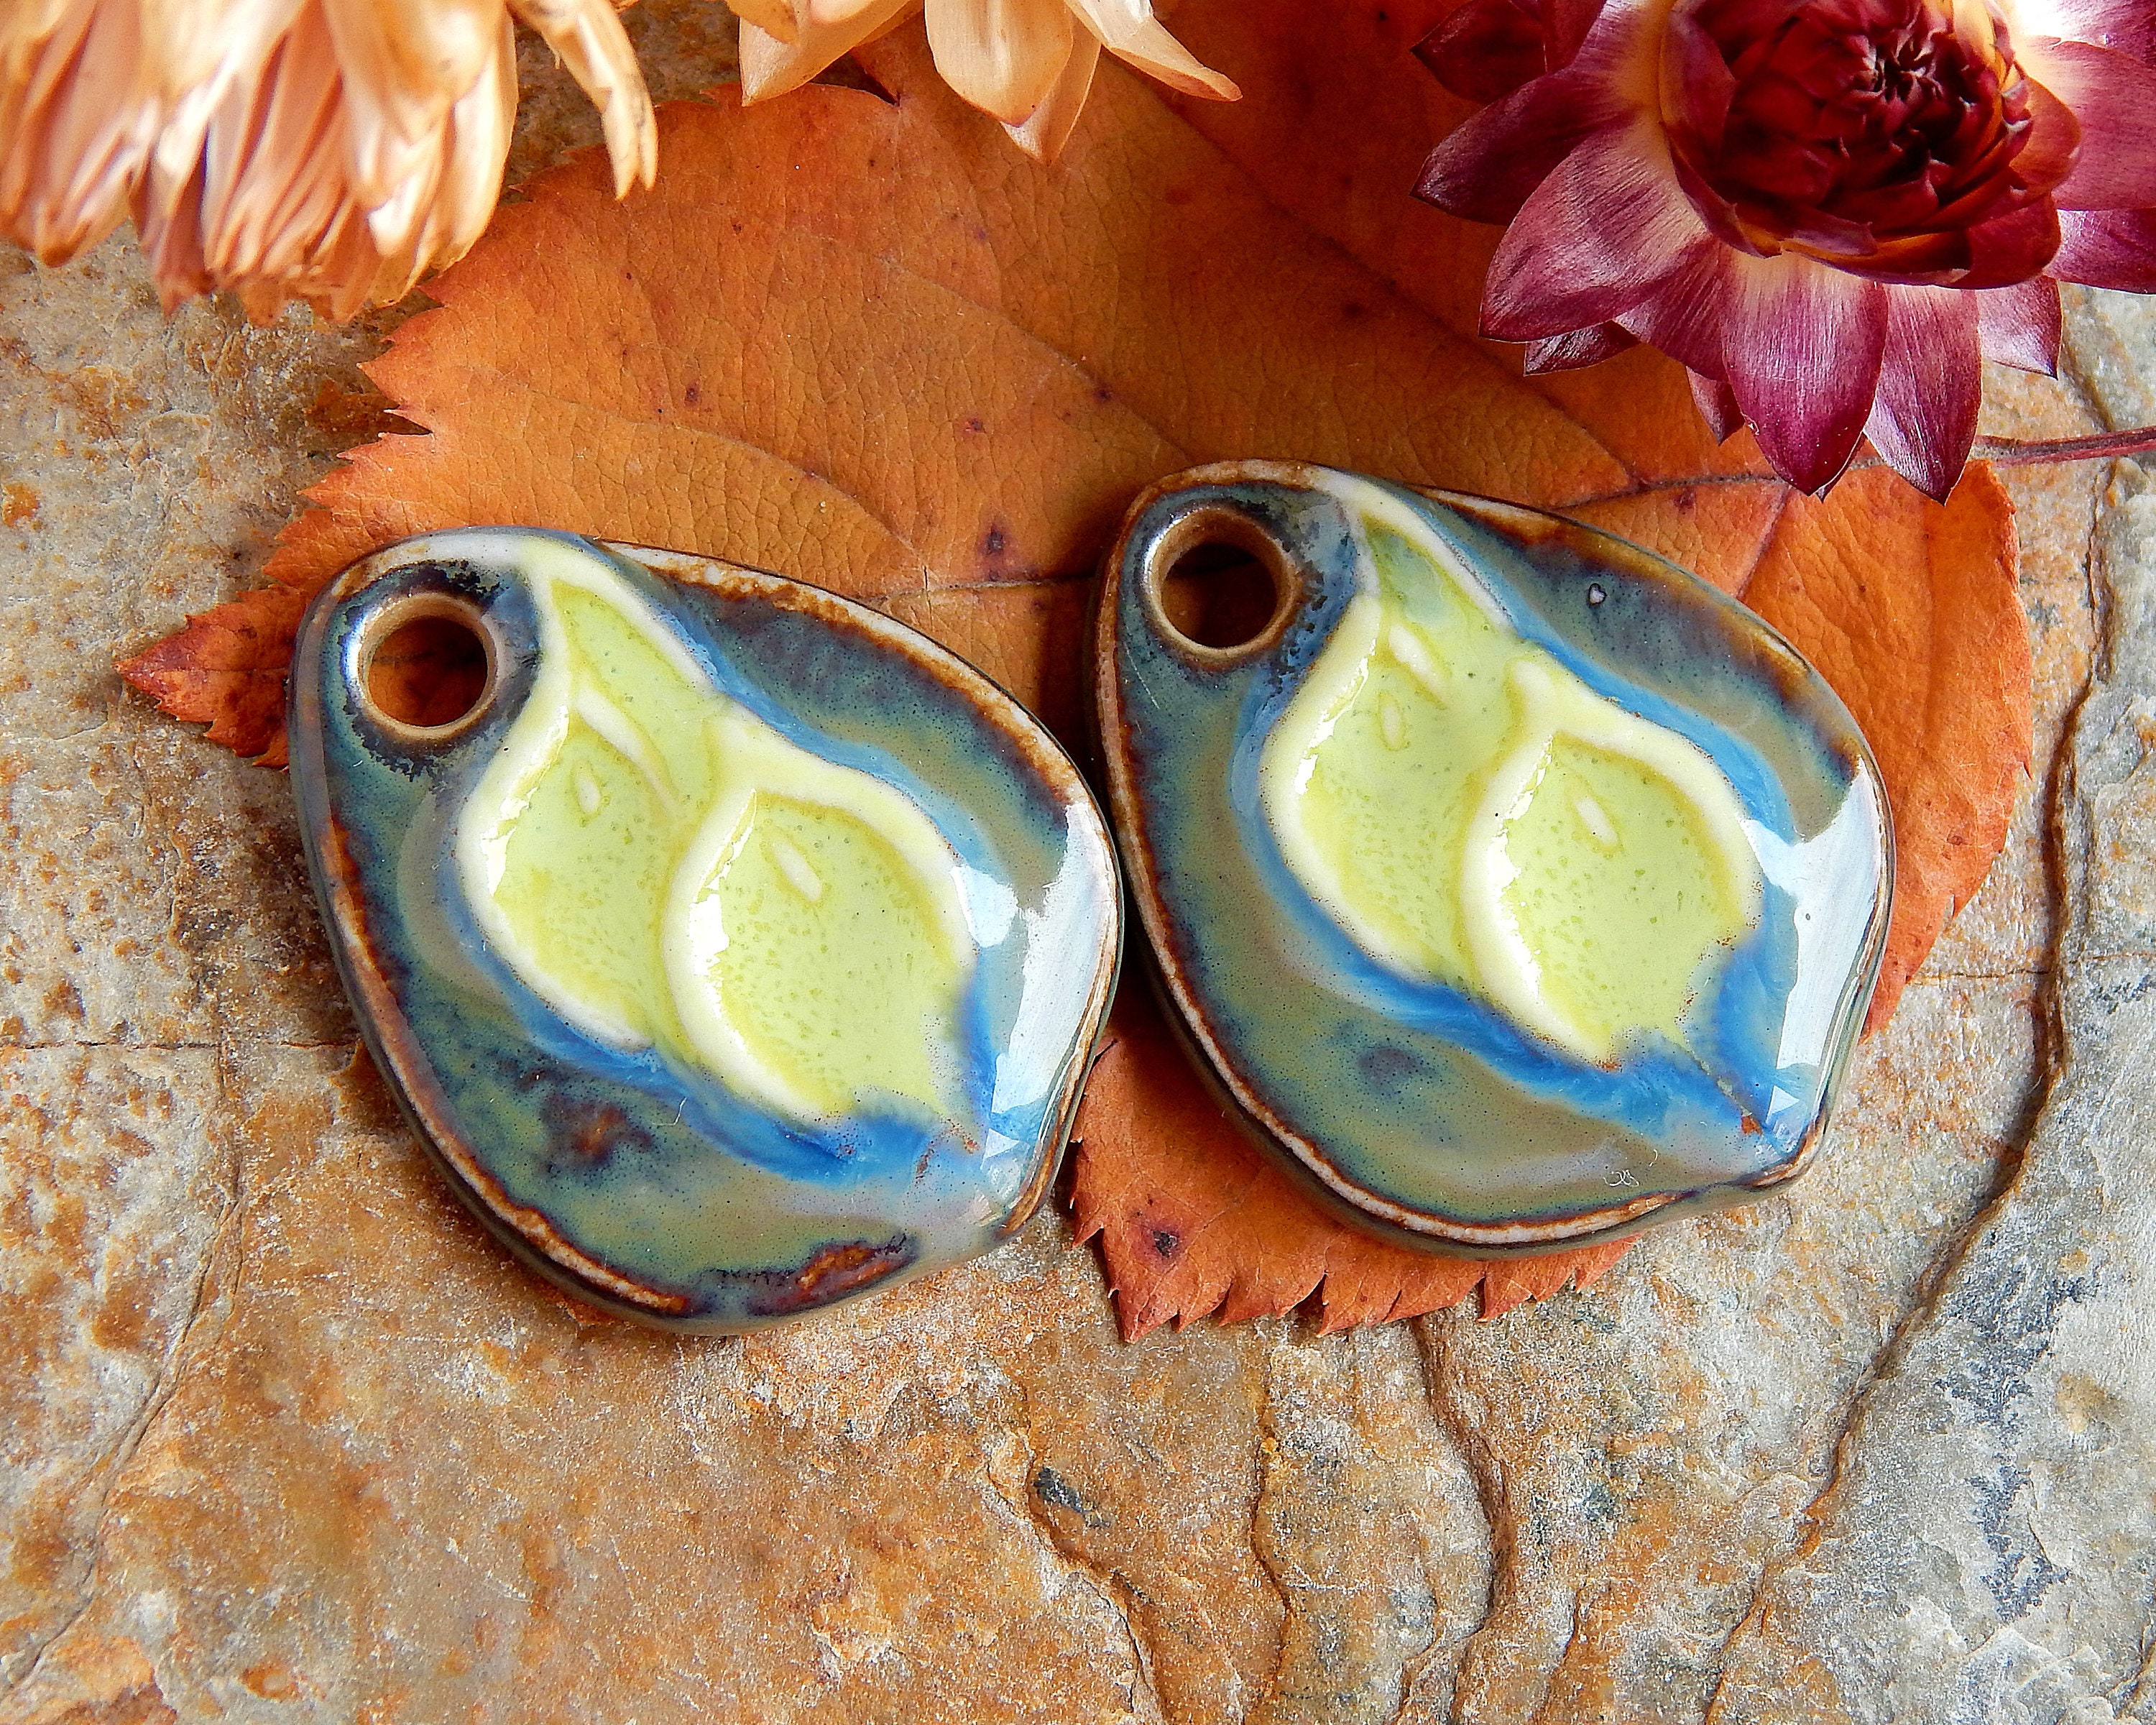 Calla Lily earrings findings pair of wildflower design pendants Ceramic charms with flower pattern green jewelry making supplies